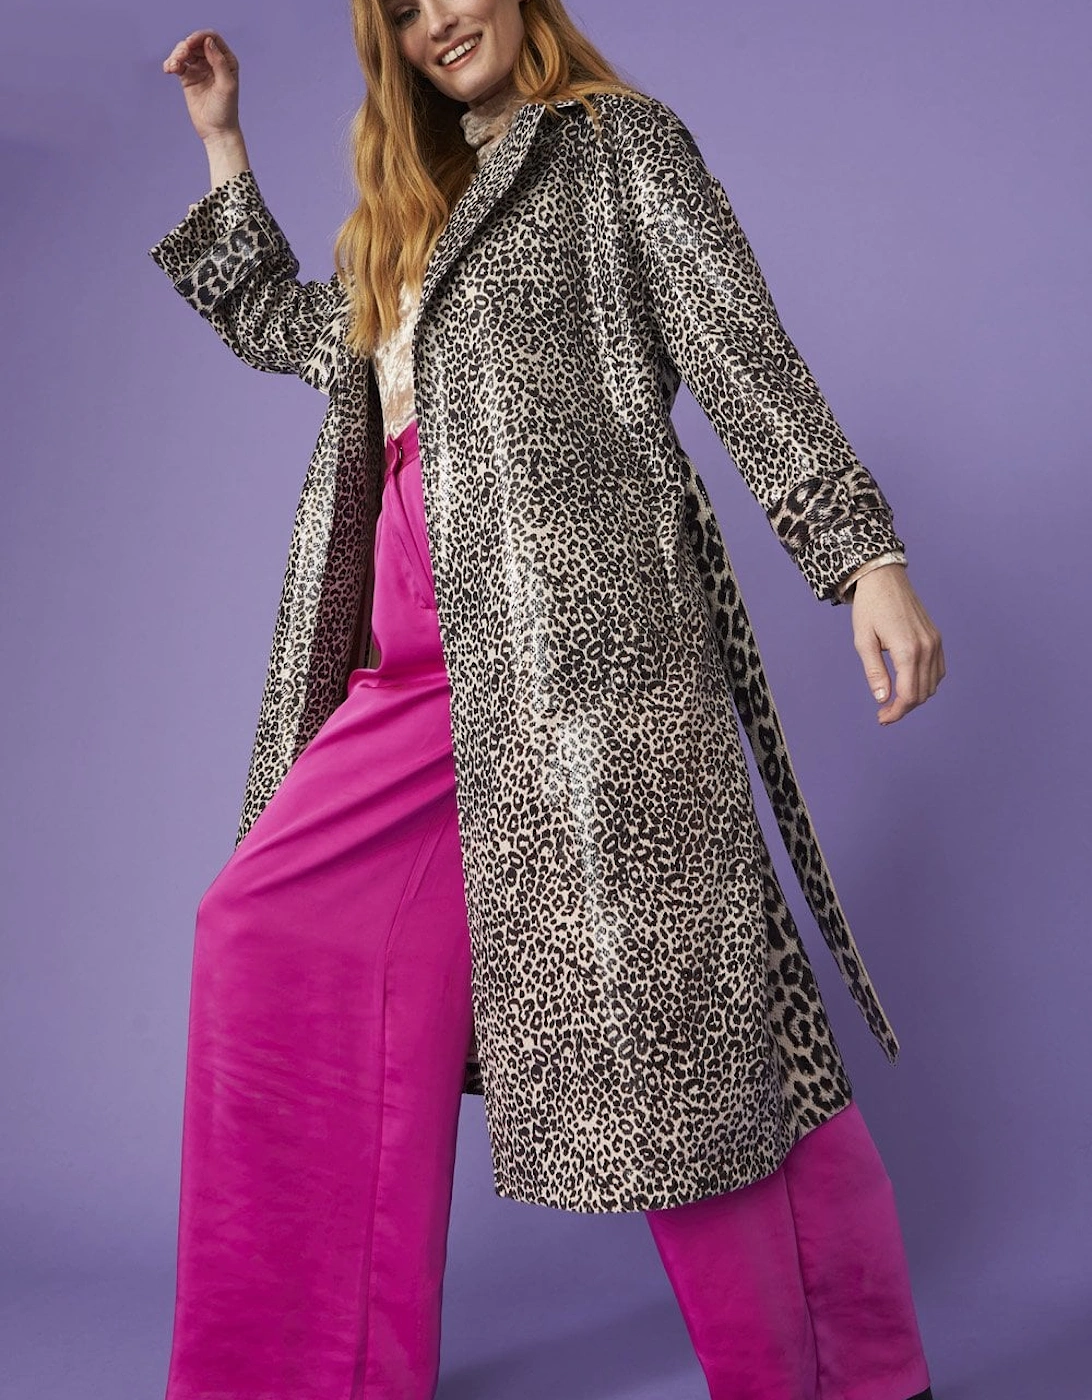 Mono Leopard Faux Suede Animal Print Trench